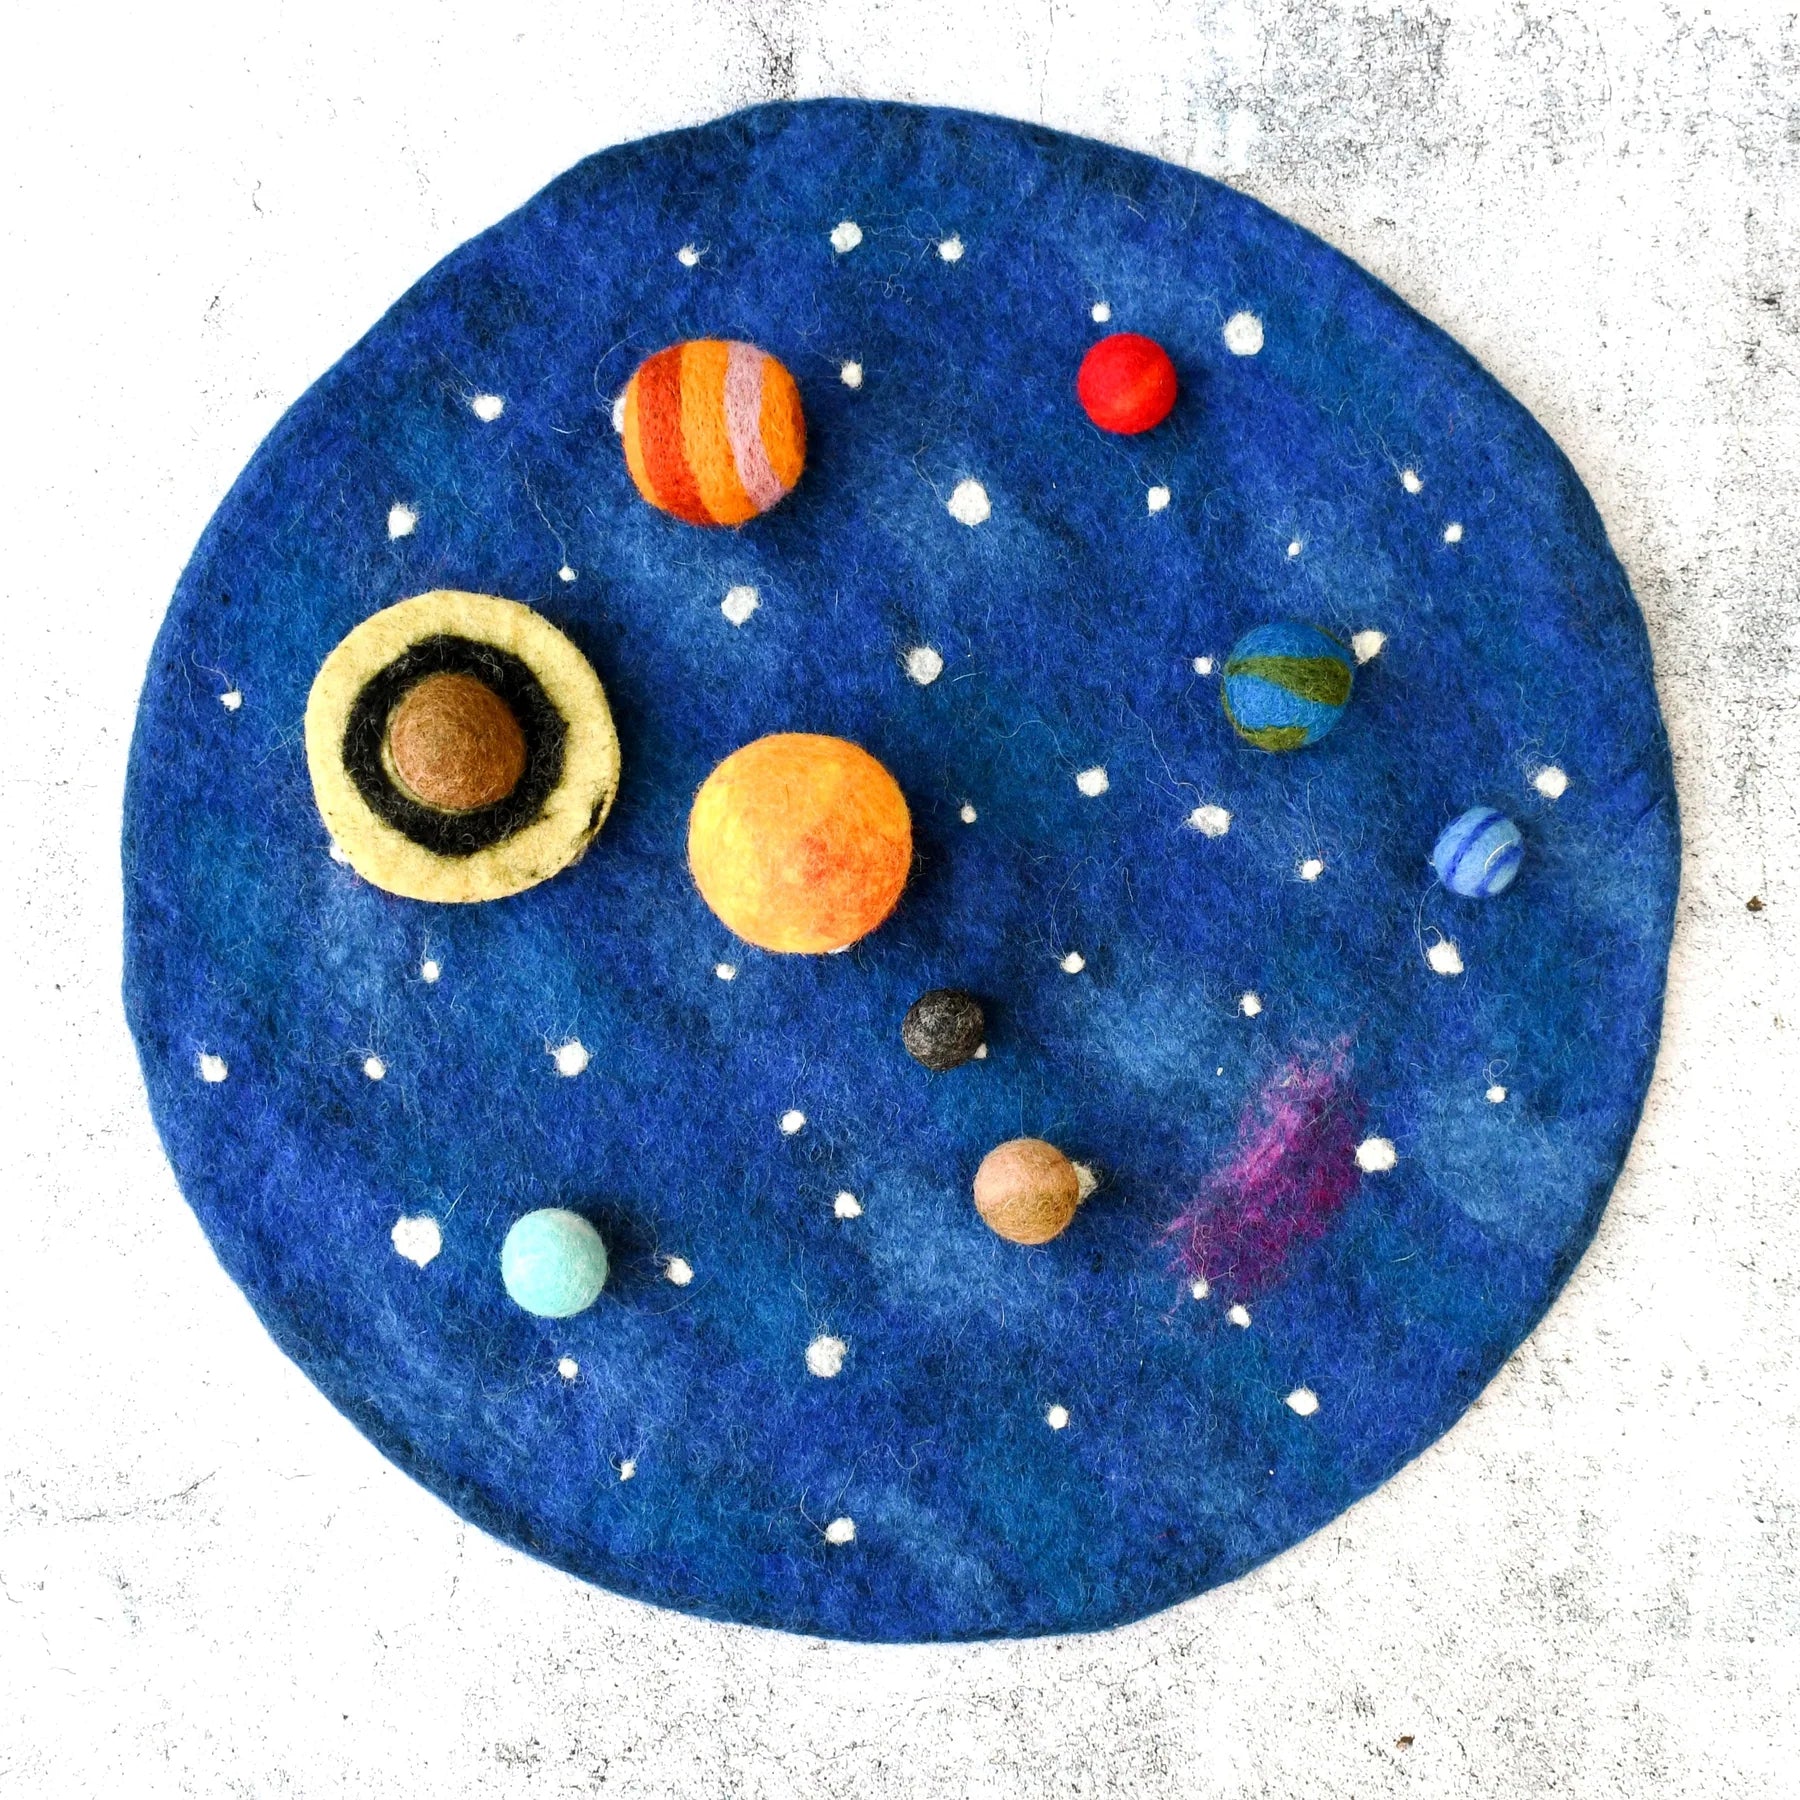 Tara Treasures Solar System Outer Space Felt Play Mat with Planets